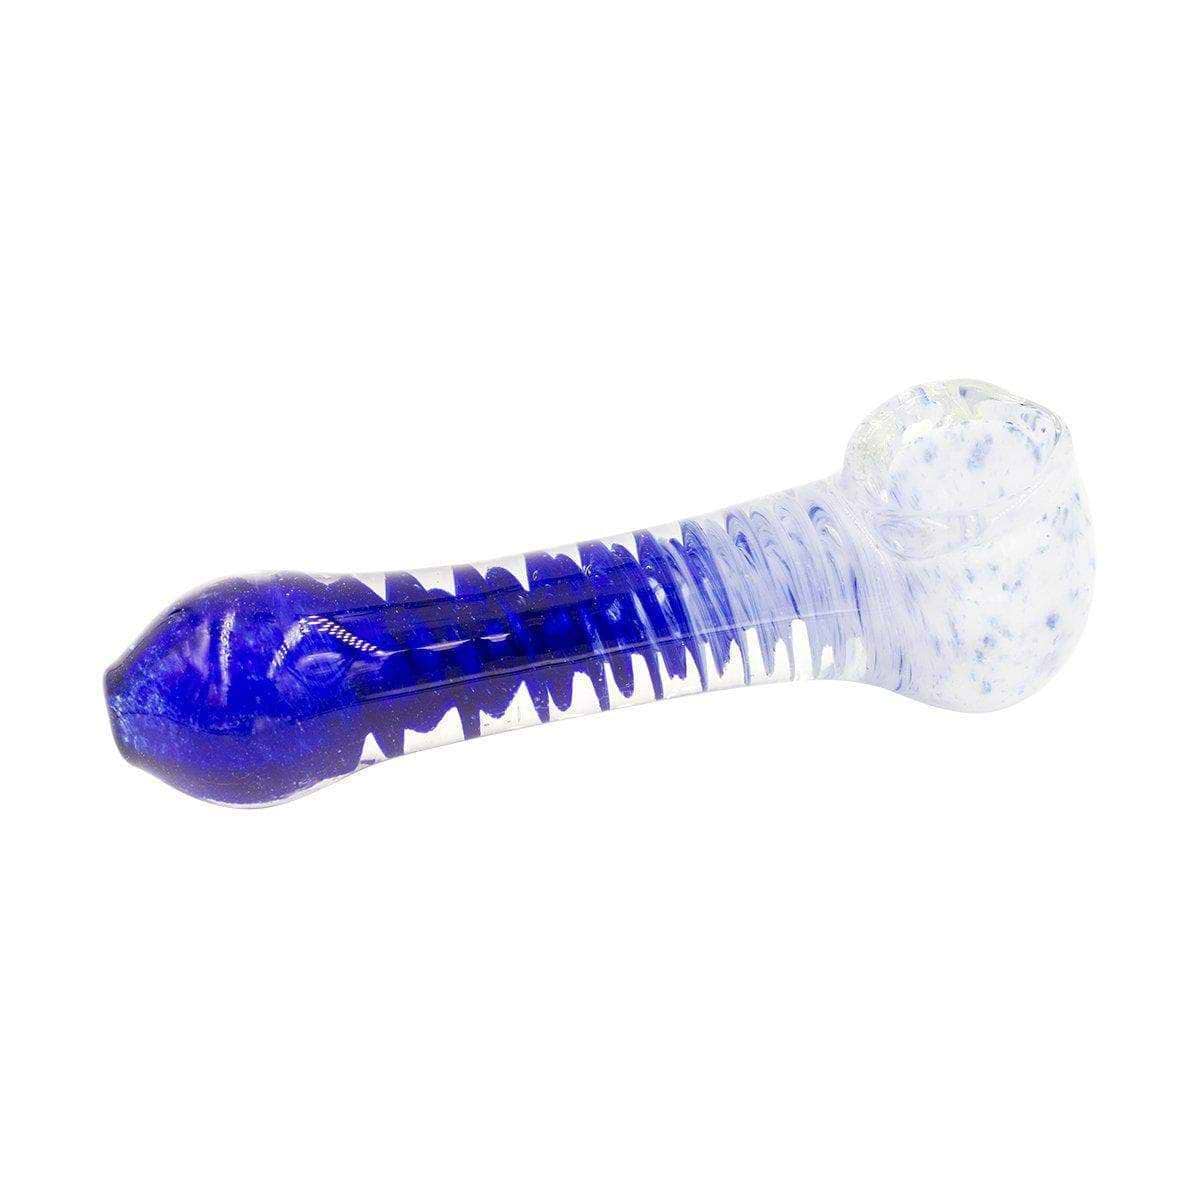 Glass Playground Pipe - 4.5in Blue and White